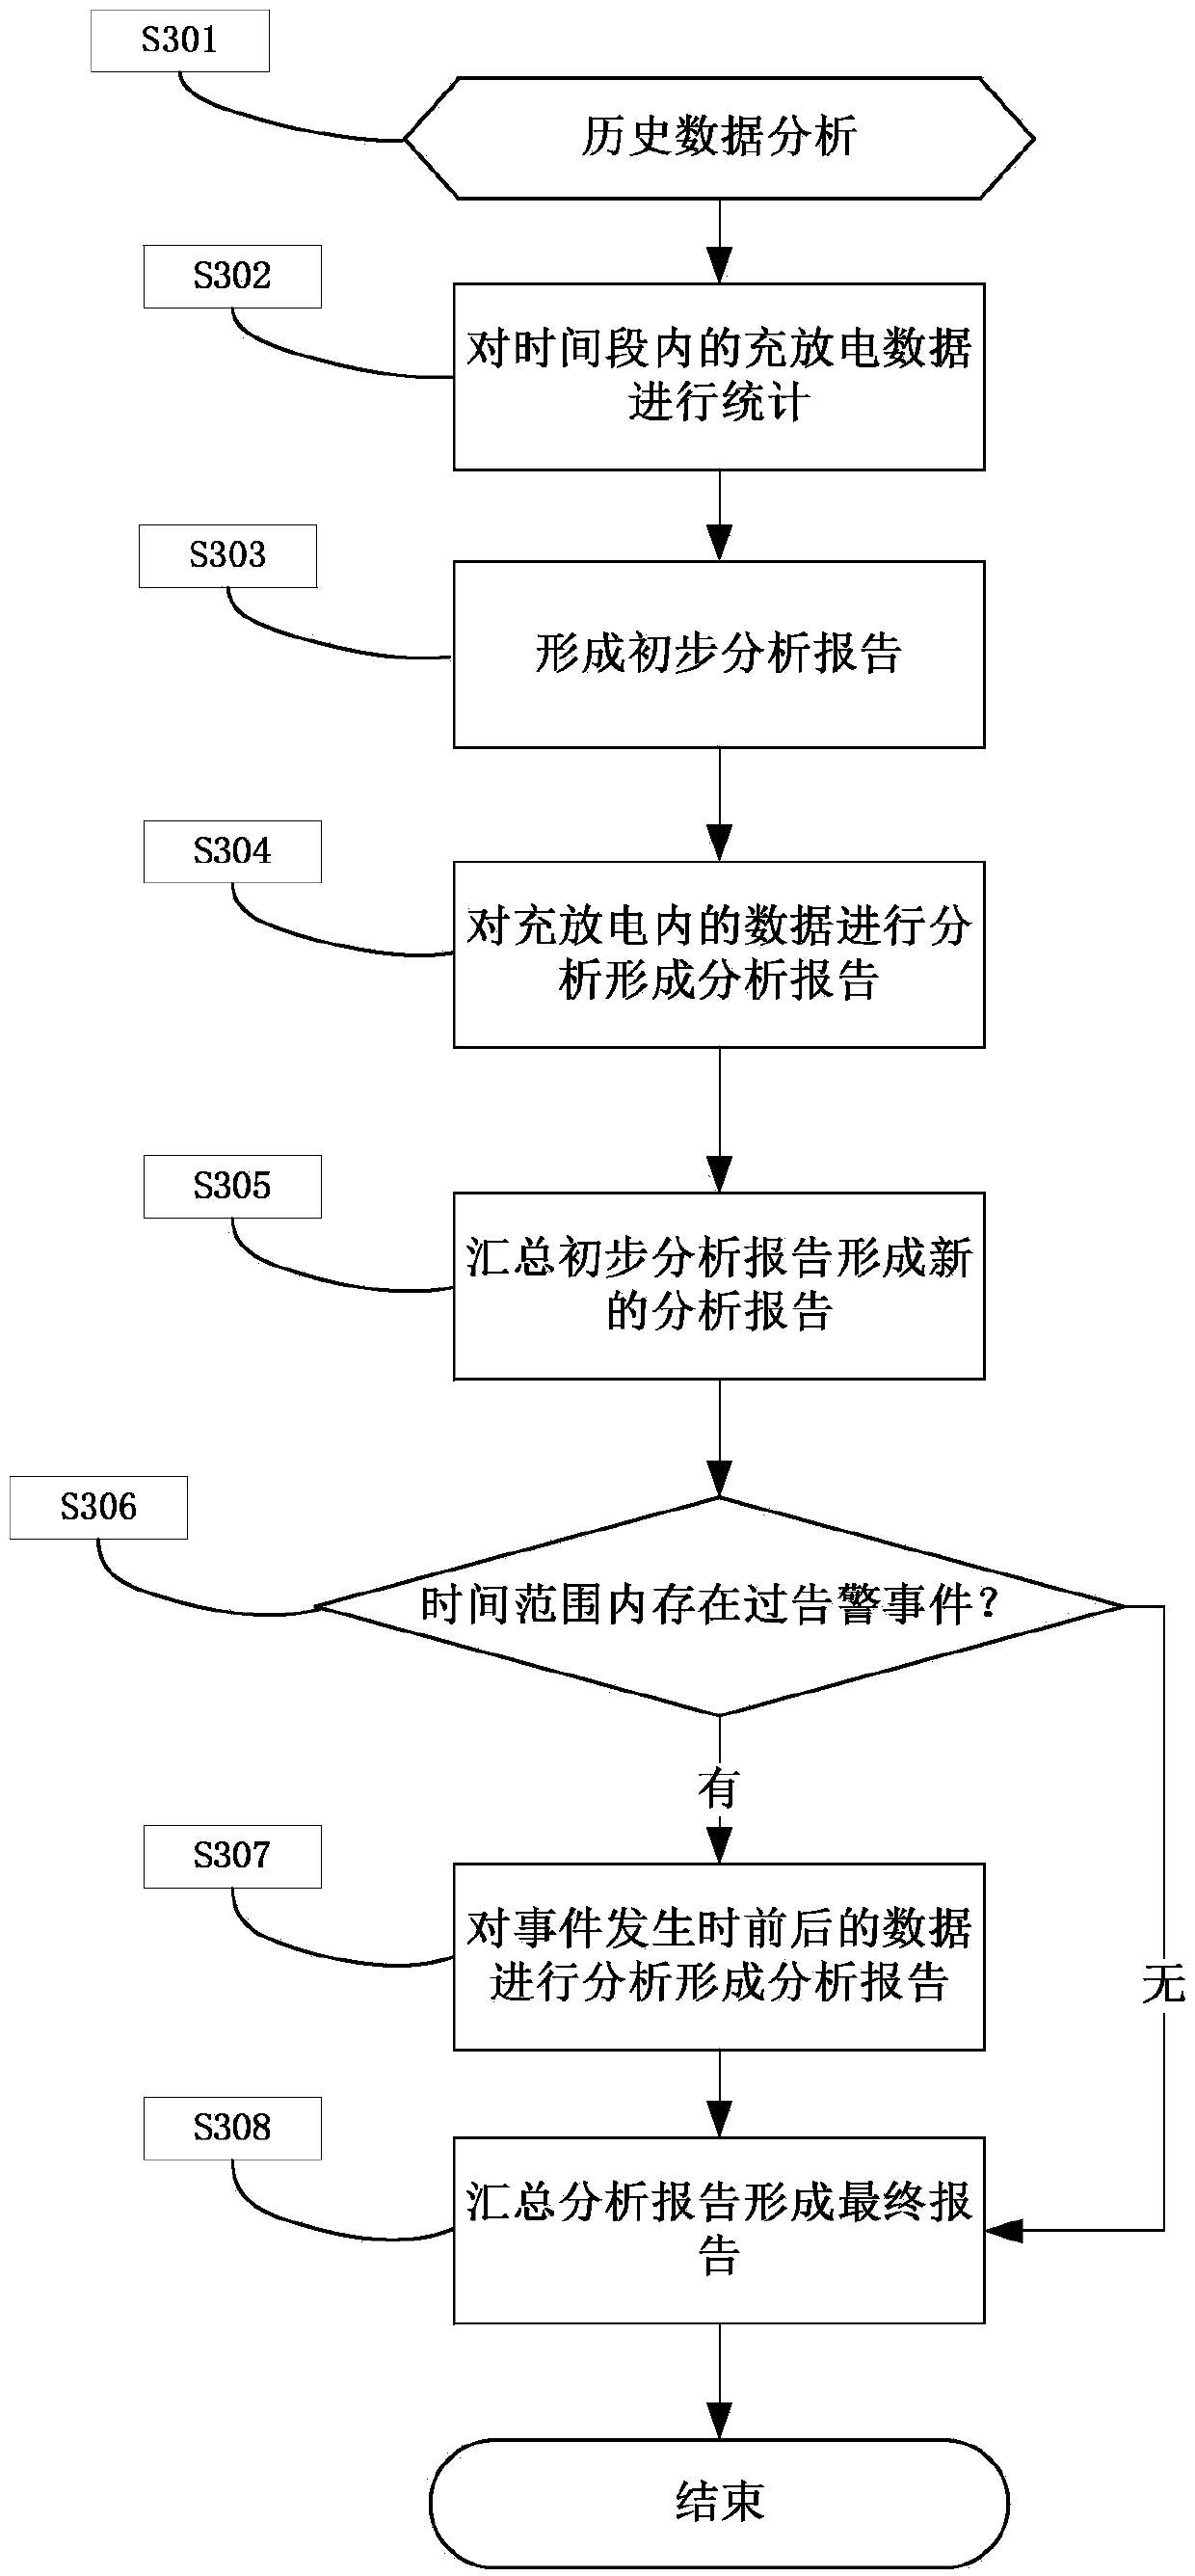 Storage battery fault diagnosis system and method based on big data